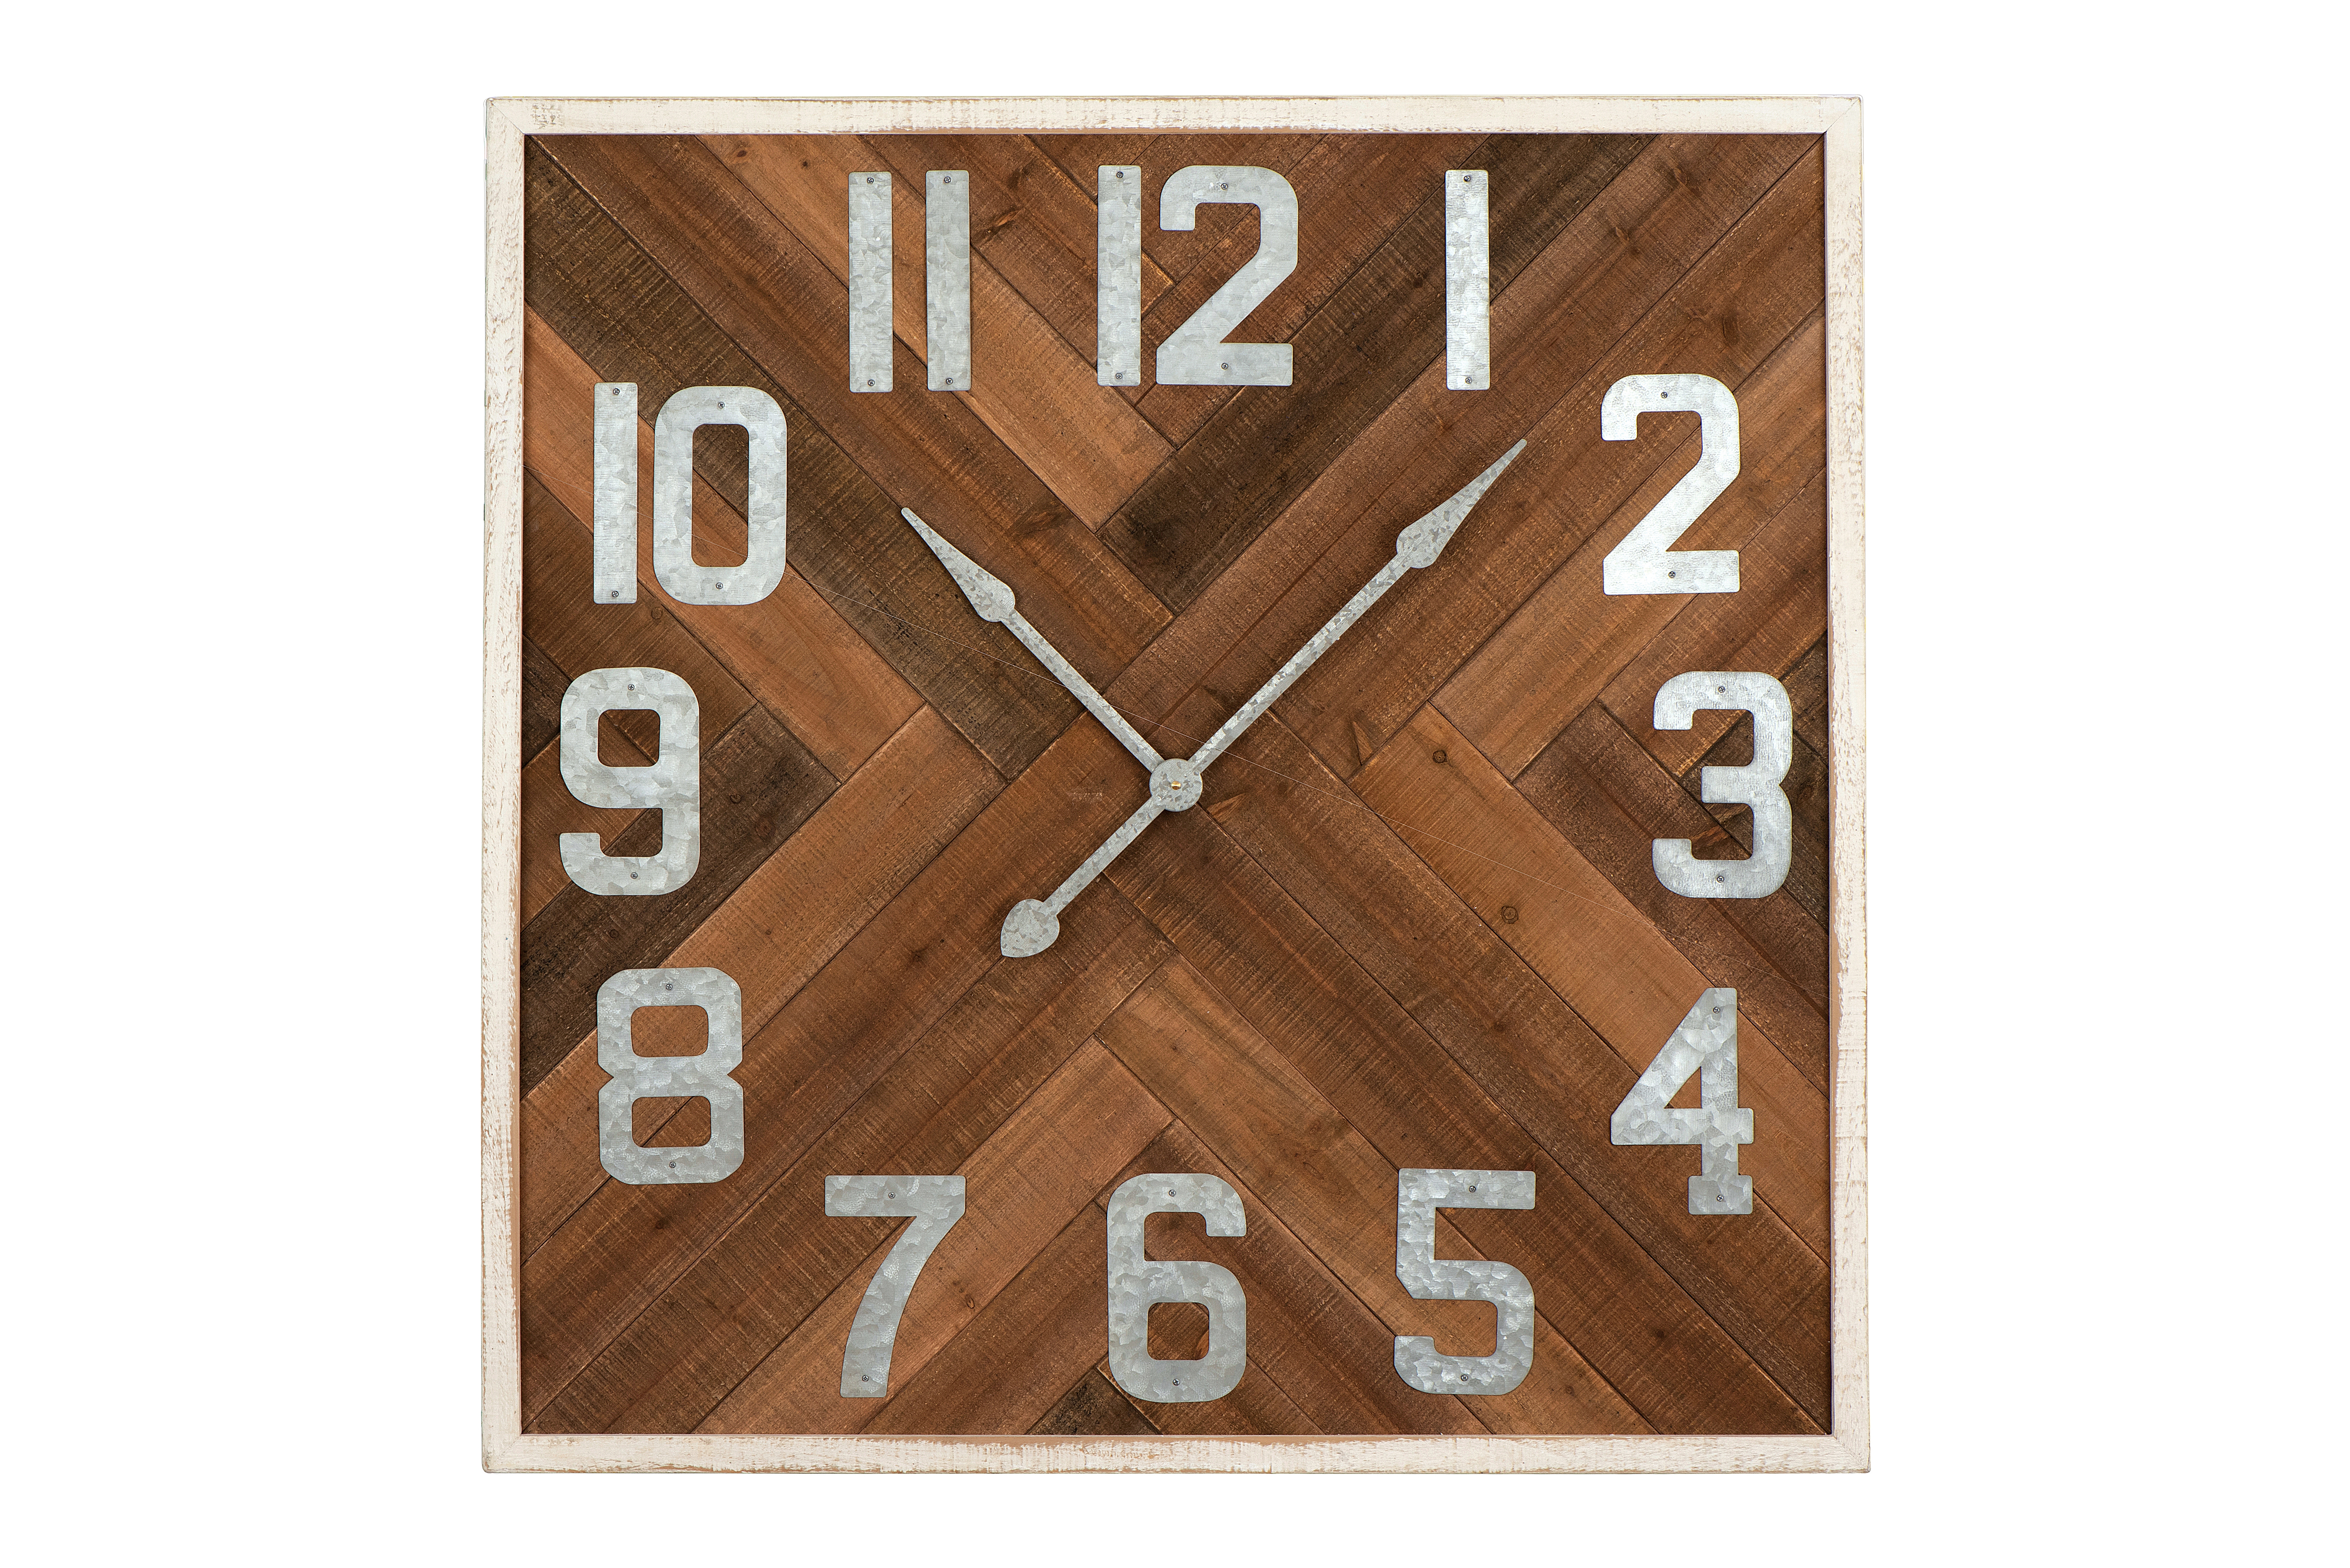 36" Square Herringbone Inlay Stained Wood Wall Clock - Nomad Home